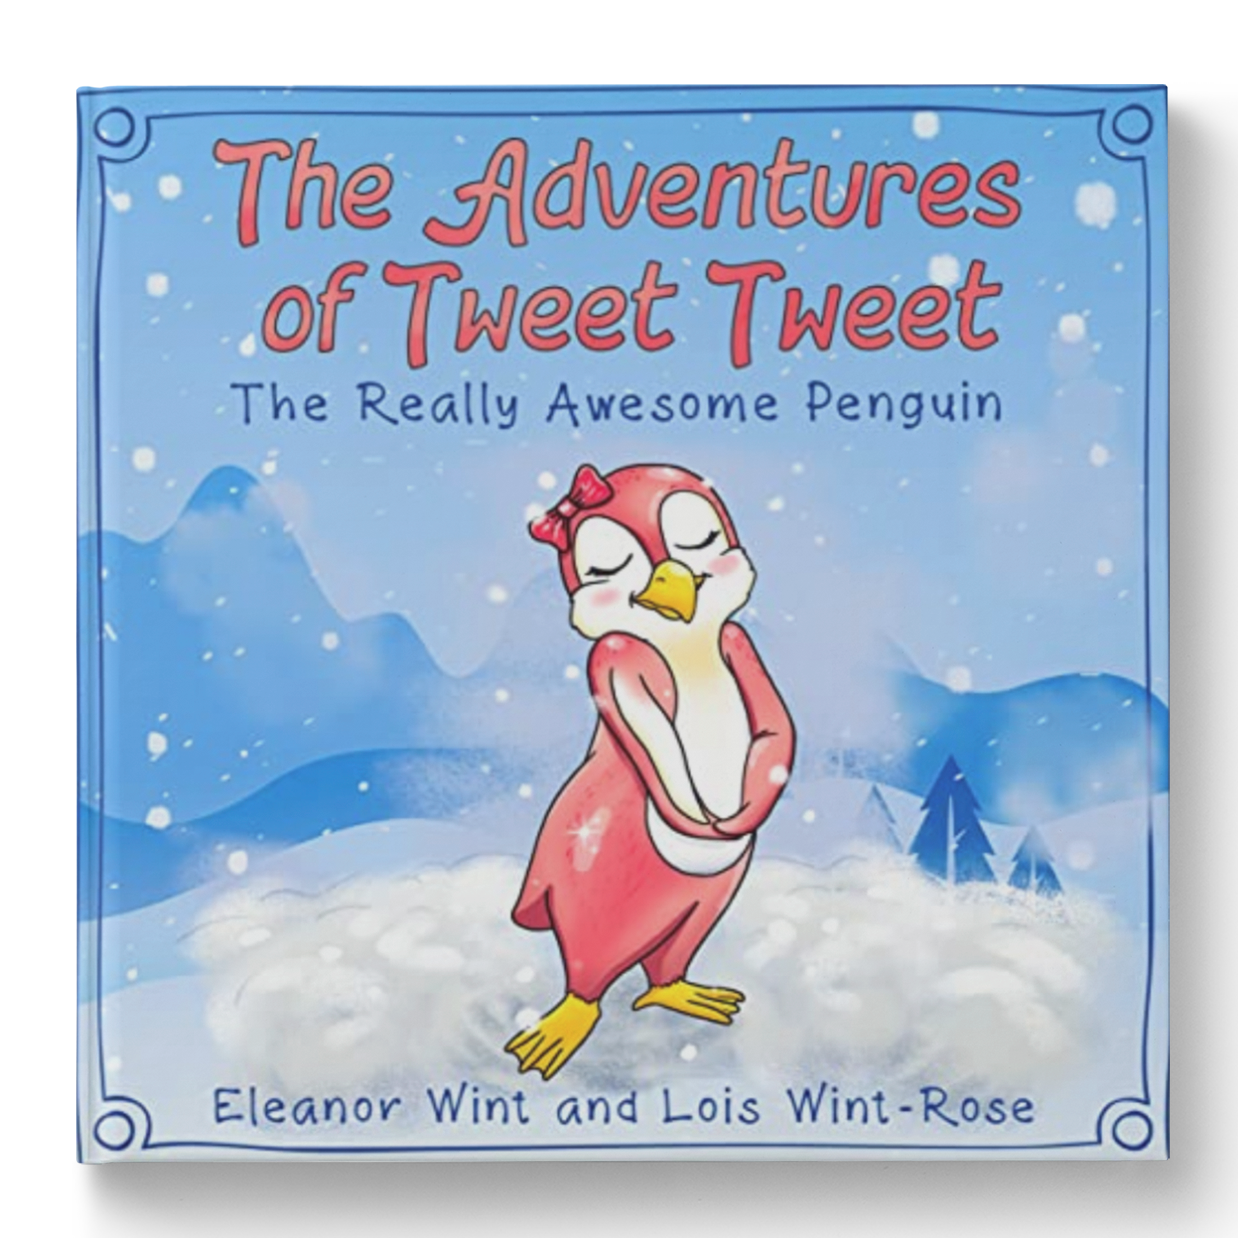 The Adventures of Tweet Tweet: The Really Awesome Penguin